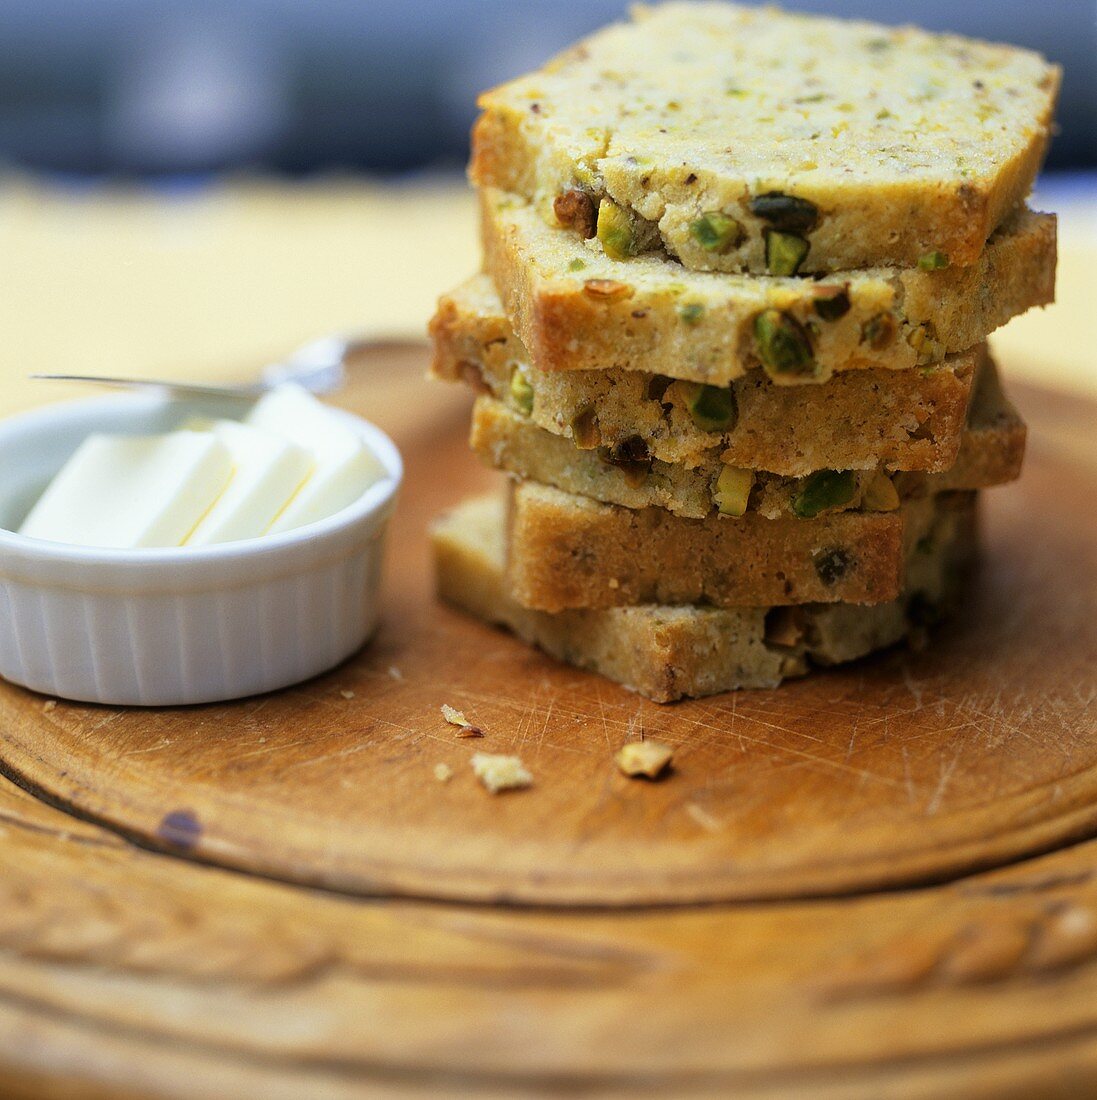 Slices of pistachio bread with butter